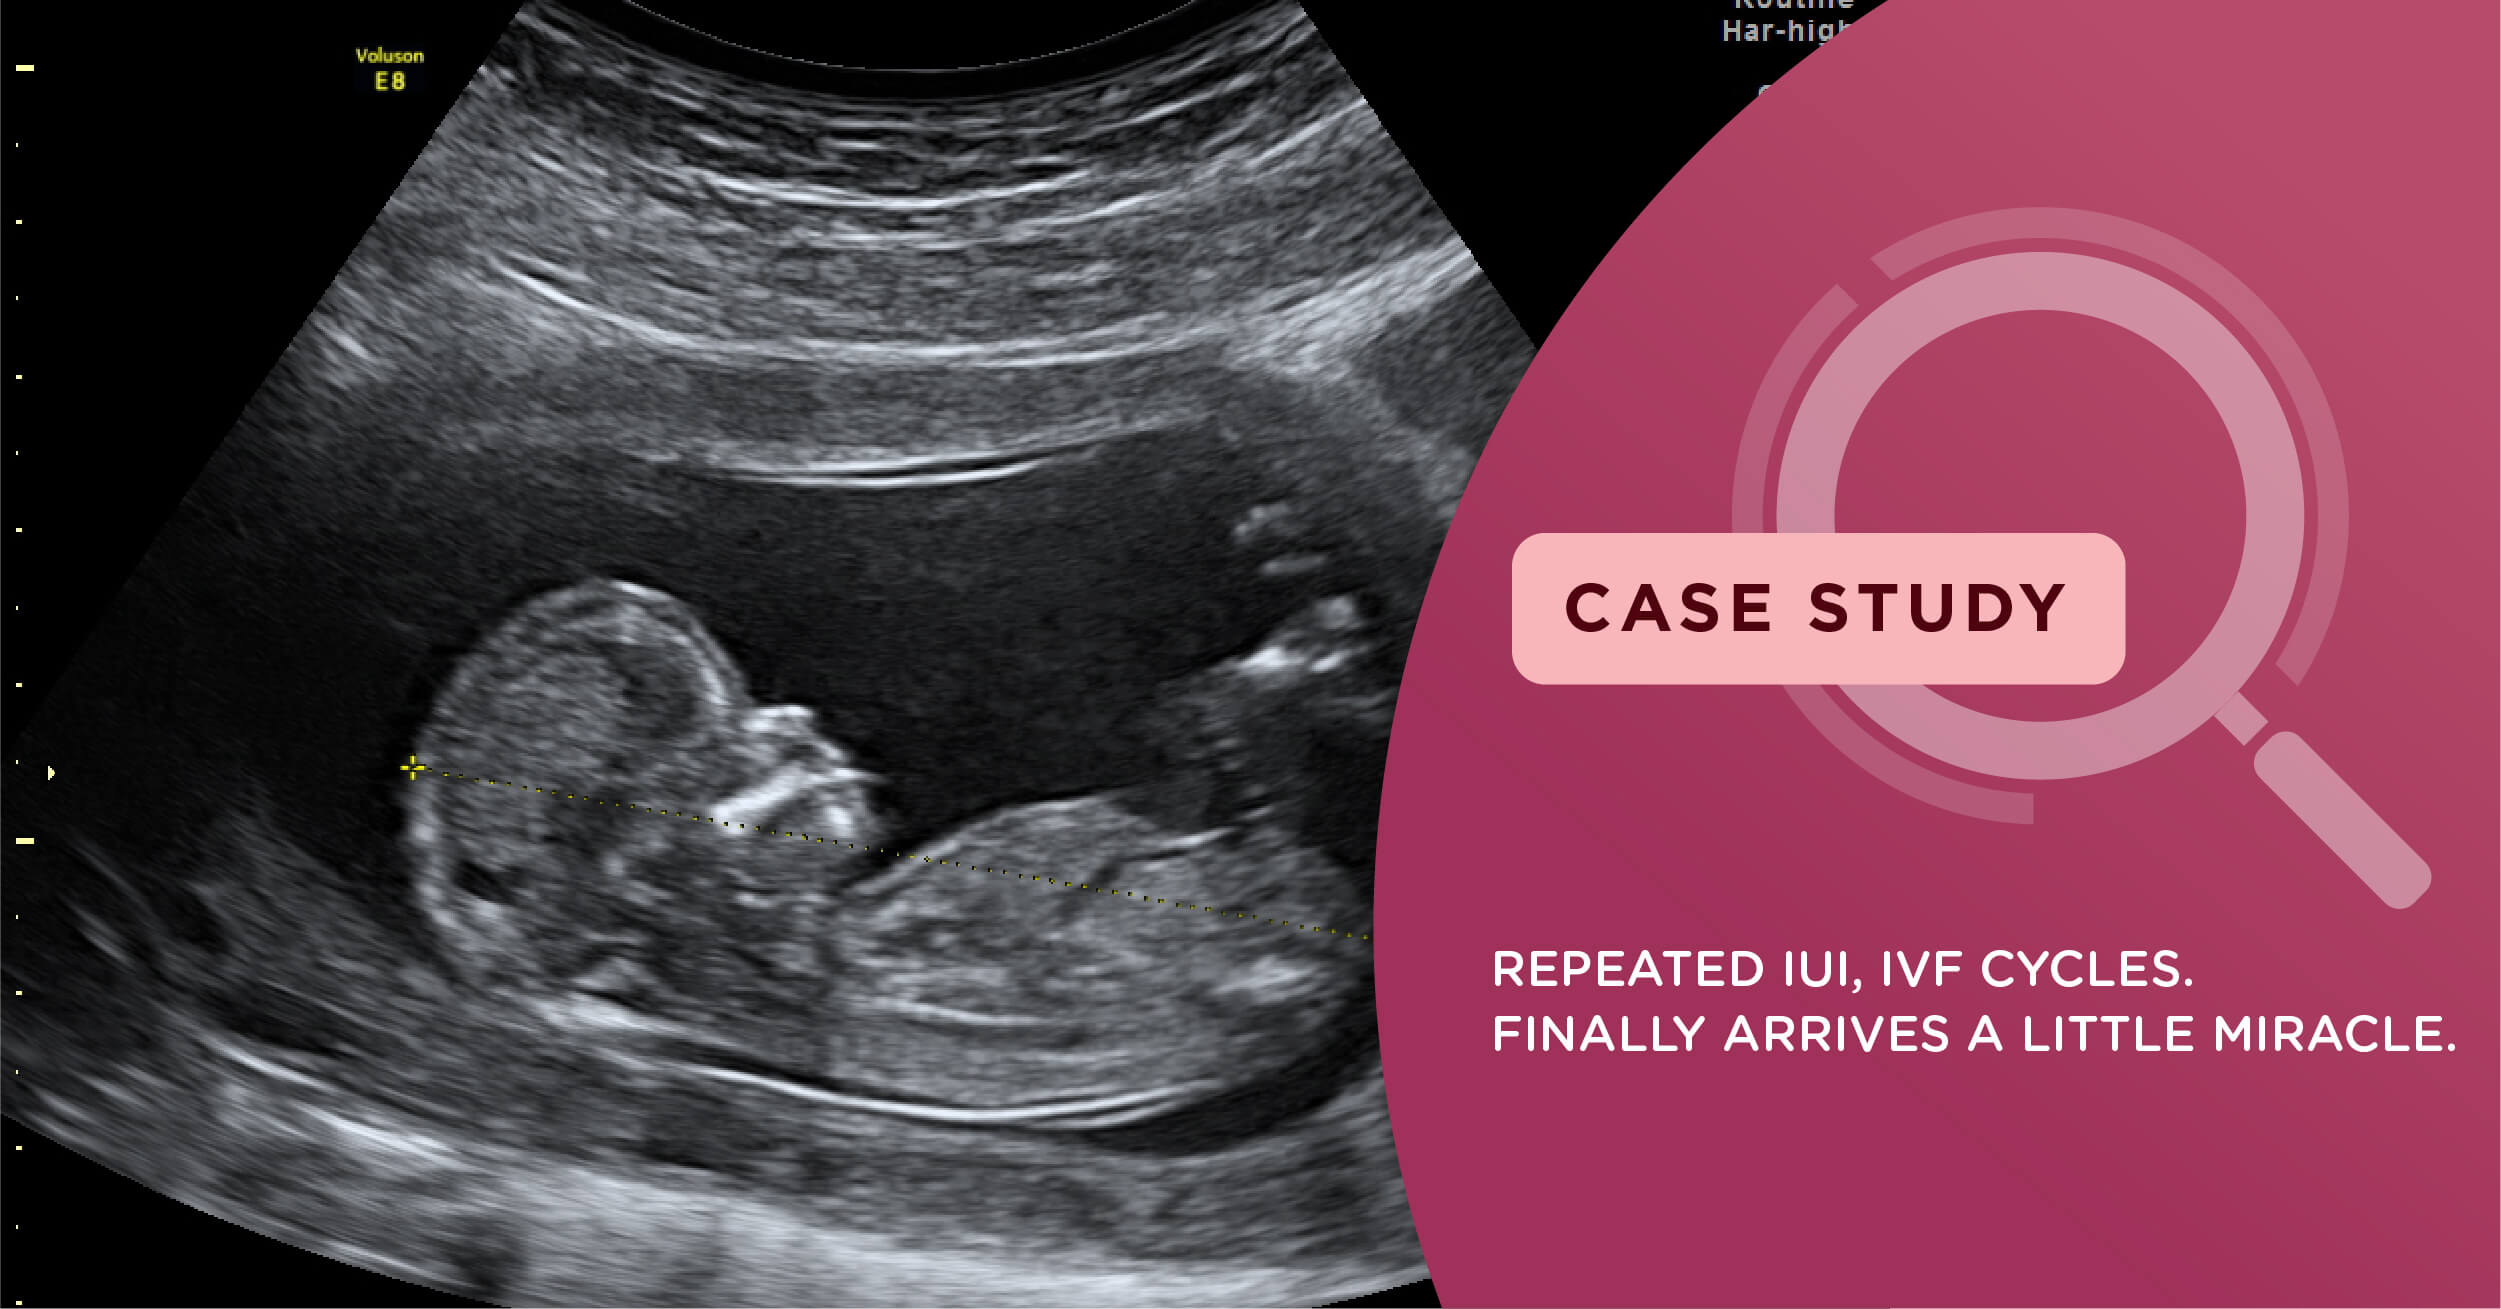 5 IUI Cycles, 5 Miscarriages, 2 Failed IVF Cycles and Finally 1 Little Miracle